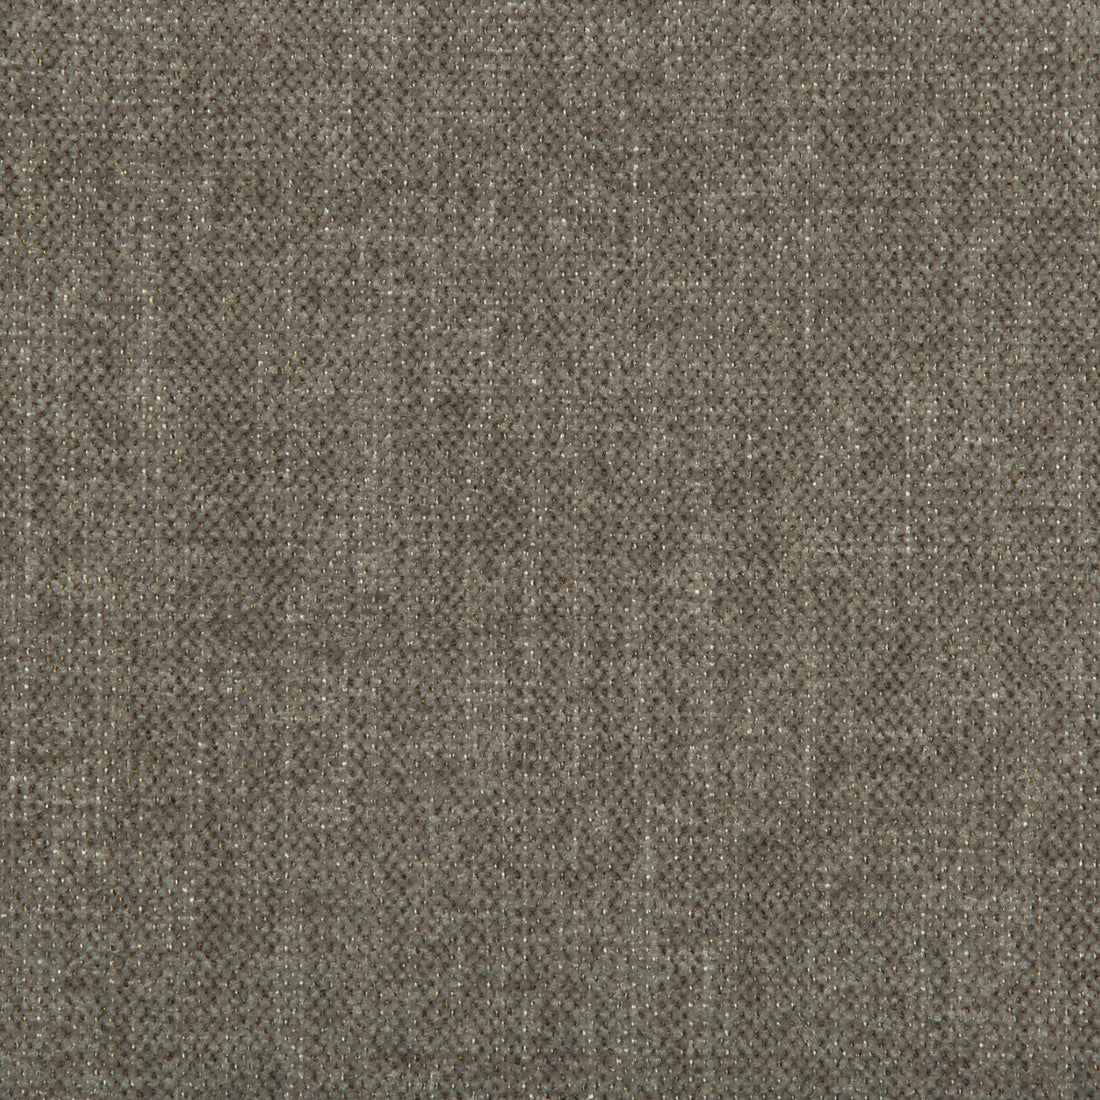 Kravet Smart fabric in 35393-21 color - pattern 35393.21.0 - by Kravet Smart in the Performance Crypton Home collection